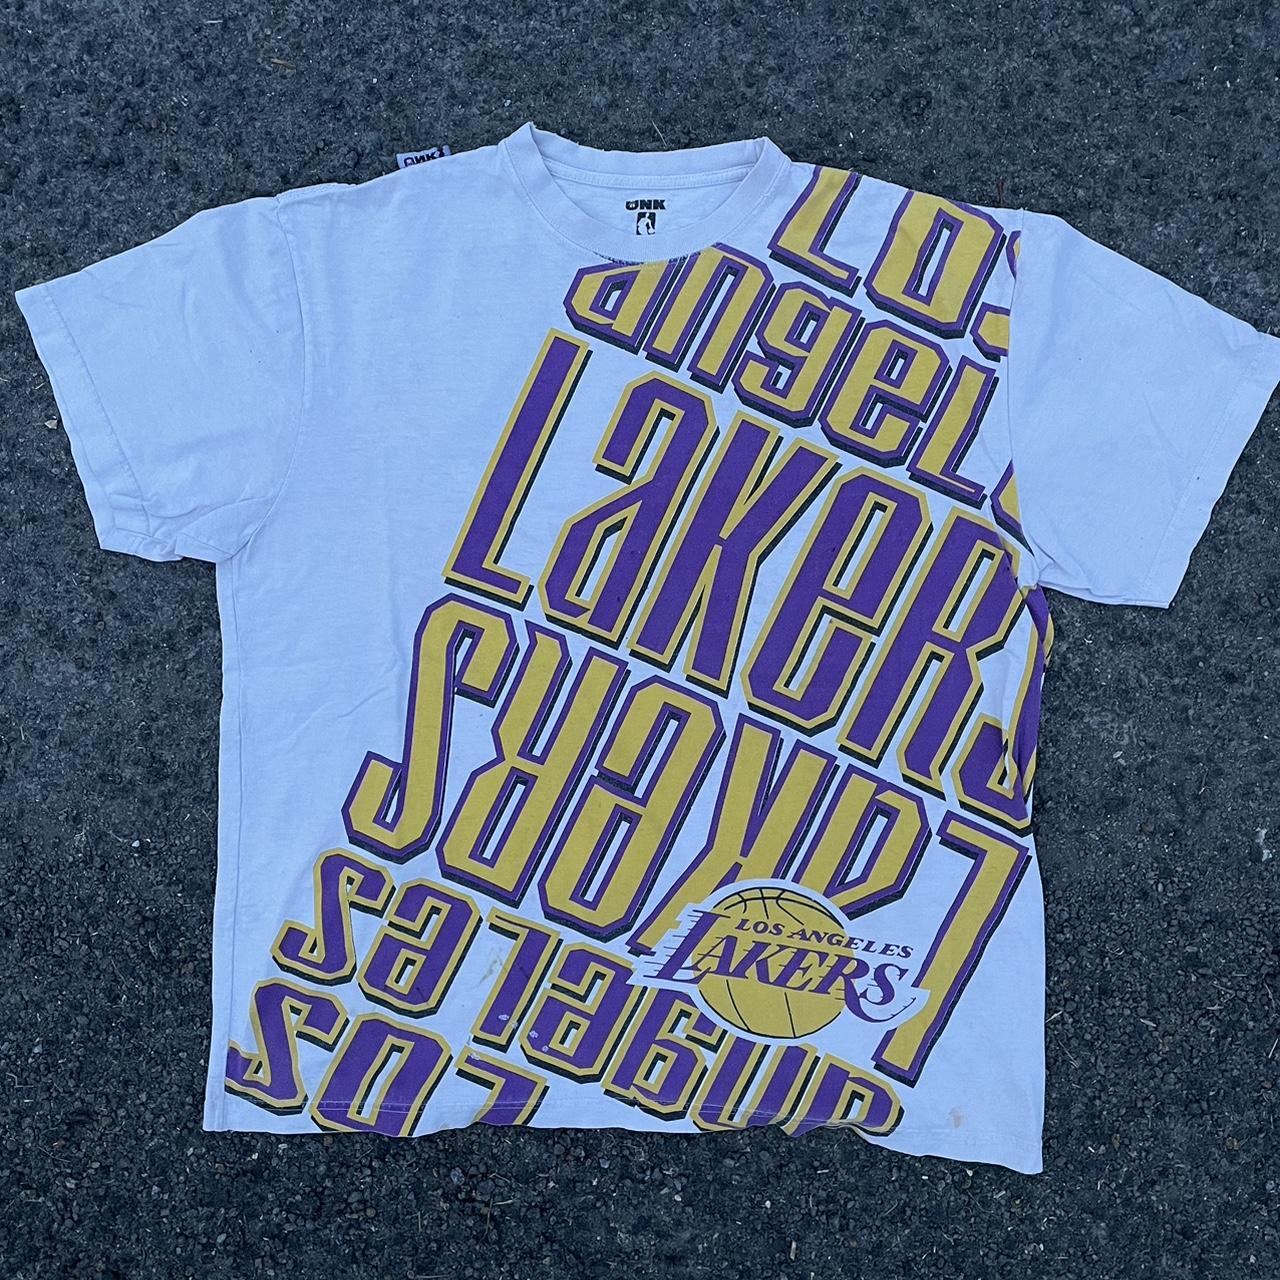 UNK Los Angeles Lakers NBA Jerseys for sale